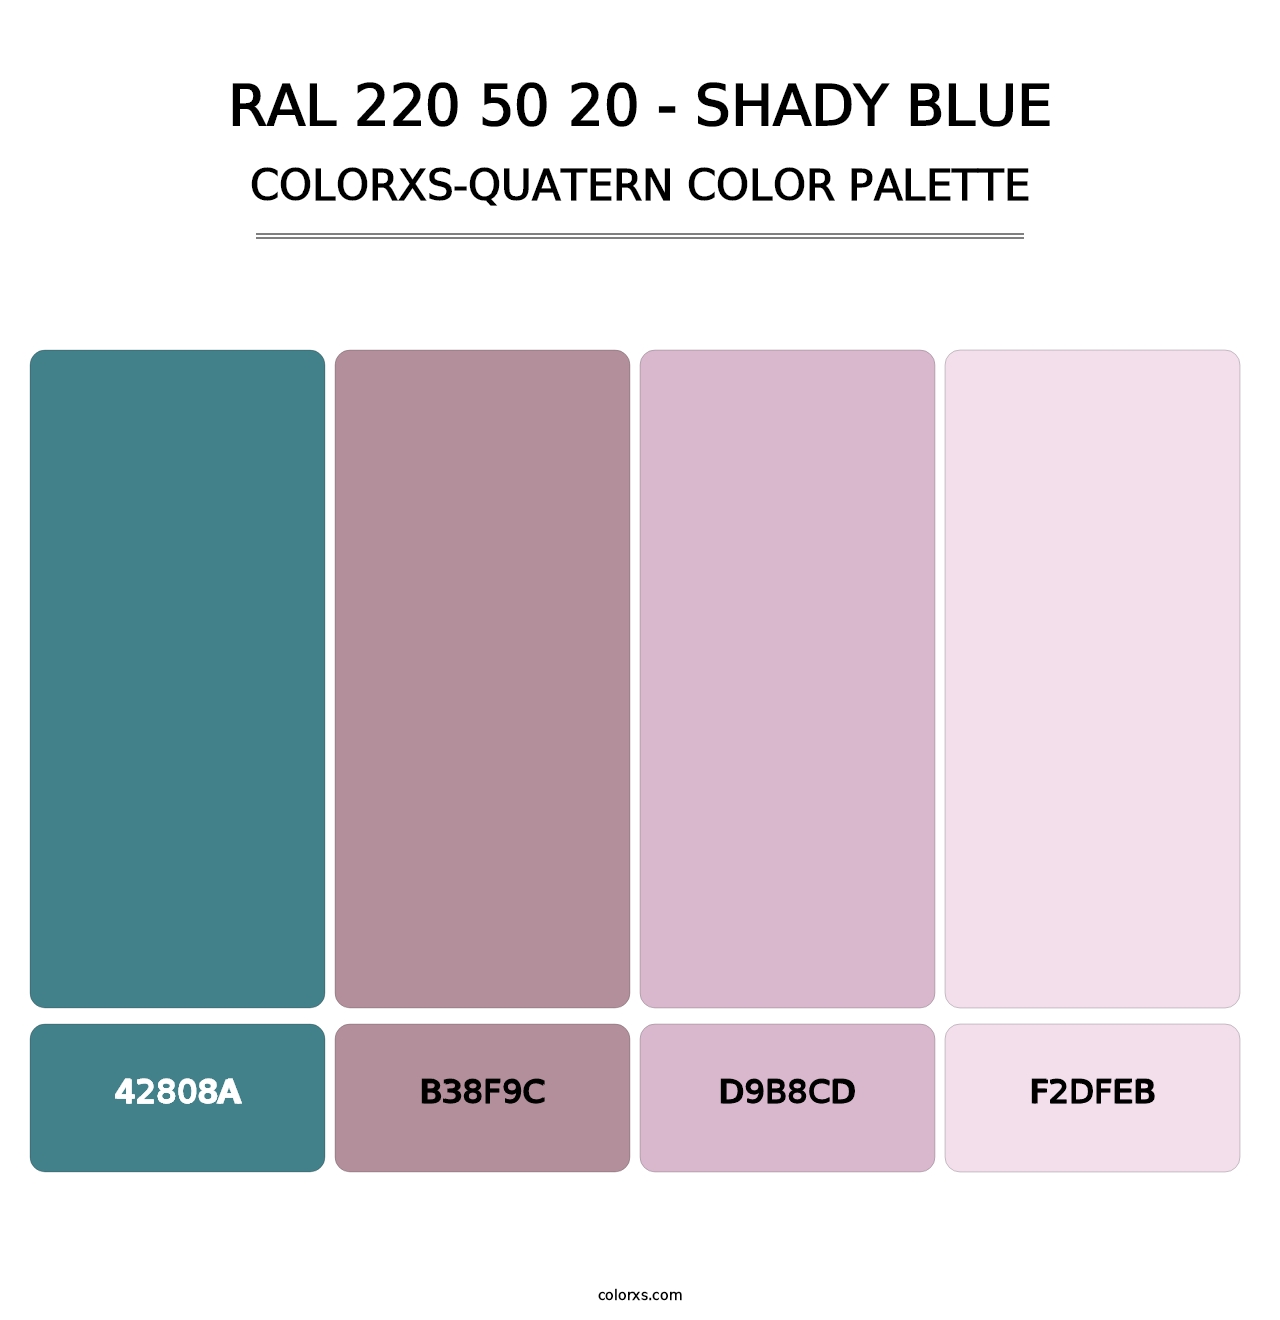 RAL 220 50 20 - Shady Blue - Colorxs Quatern Palette